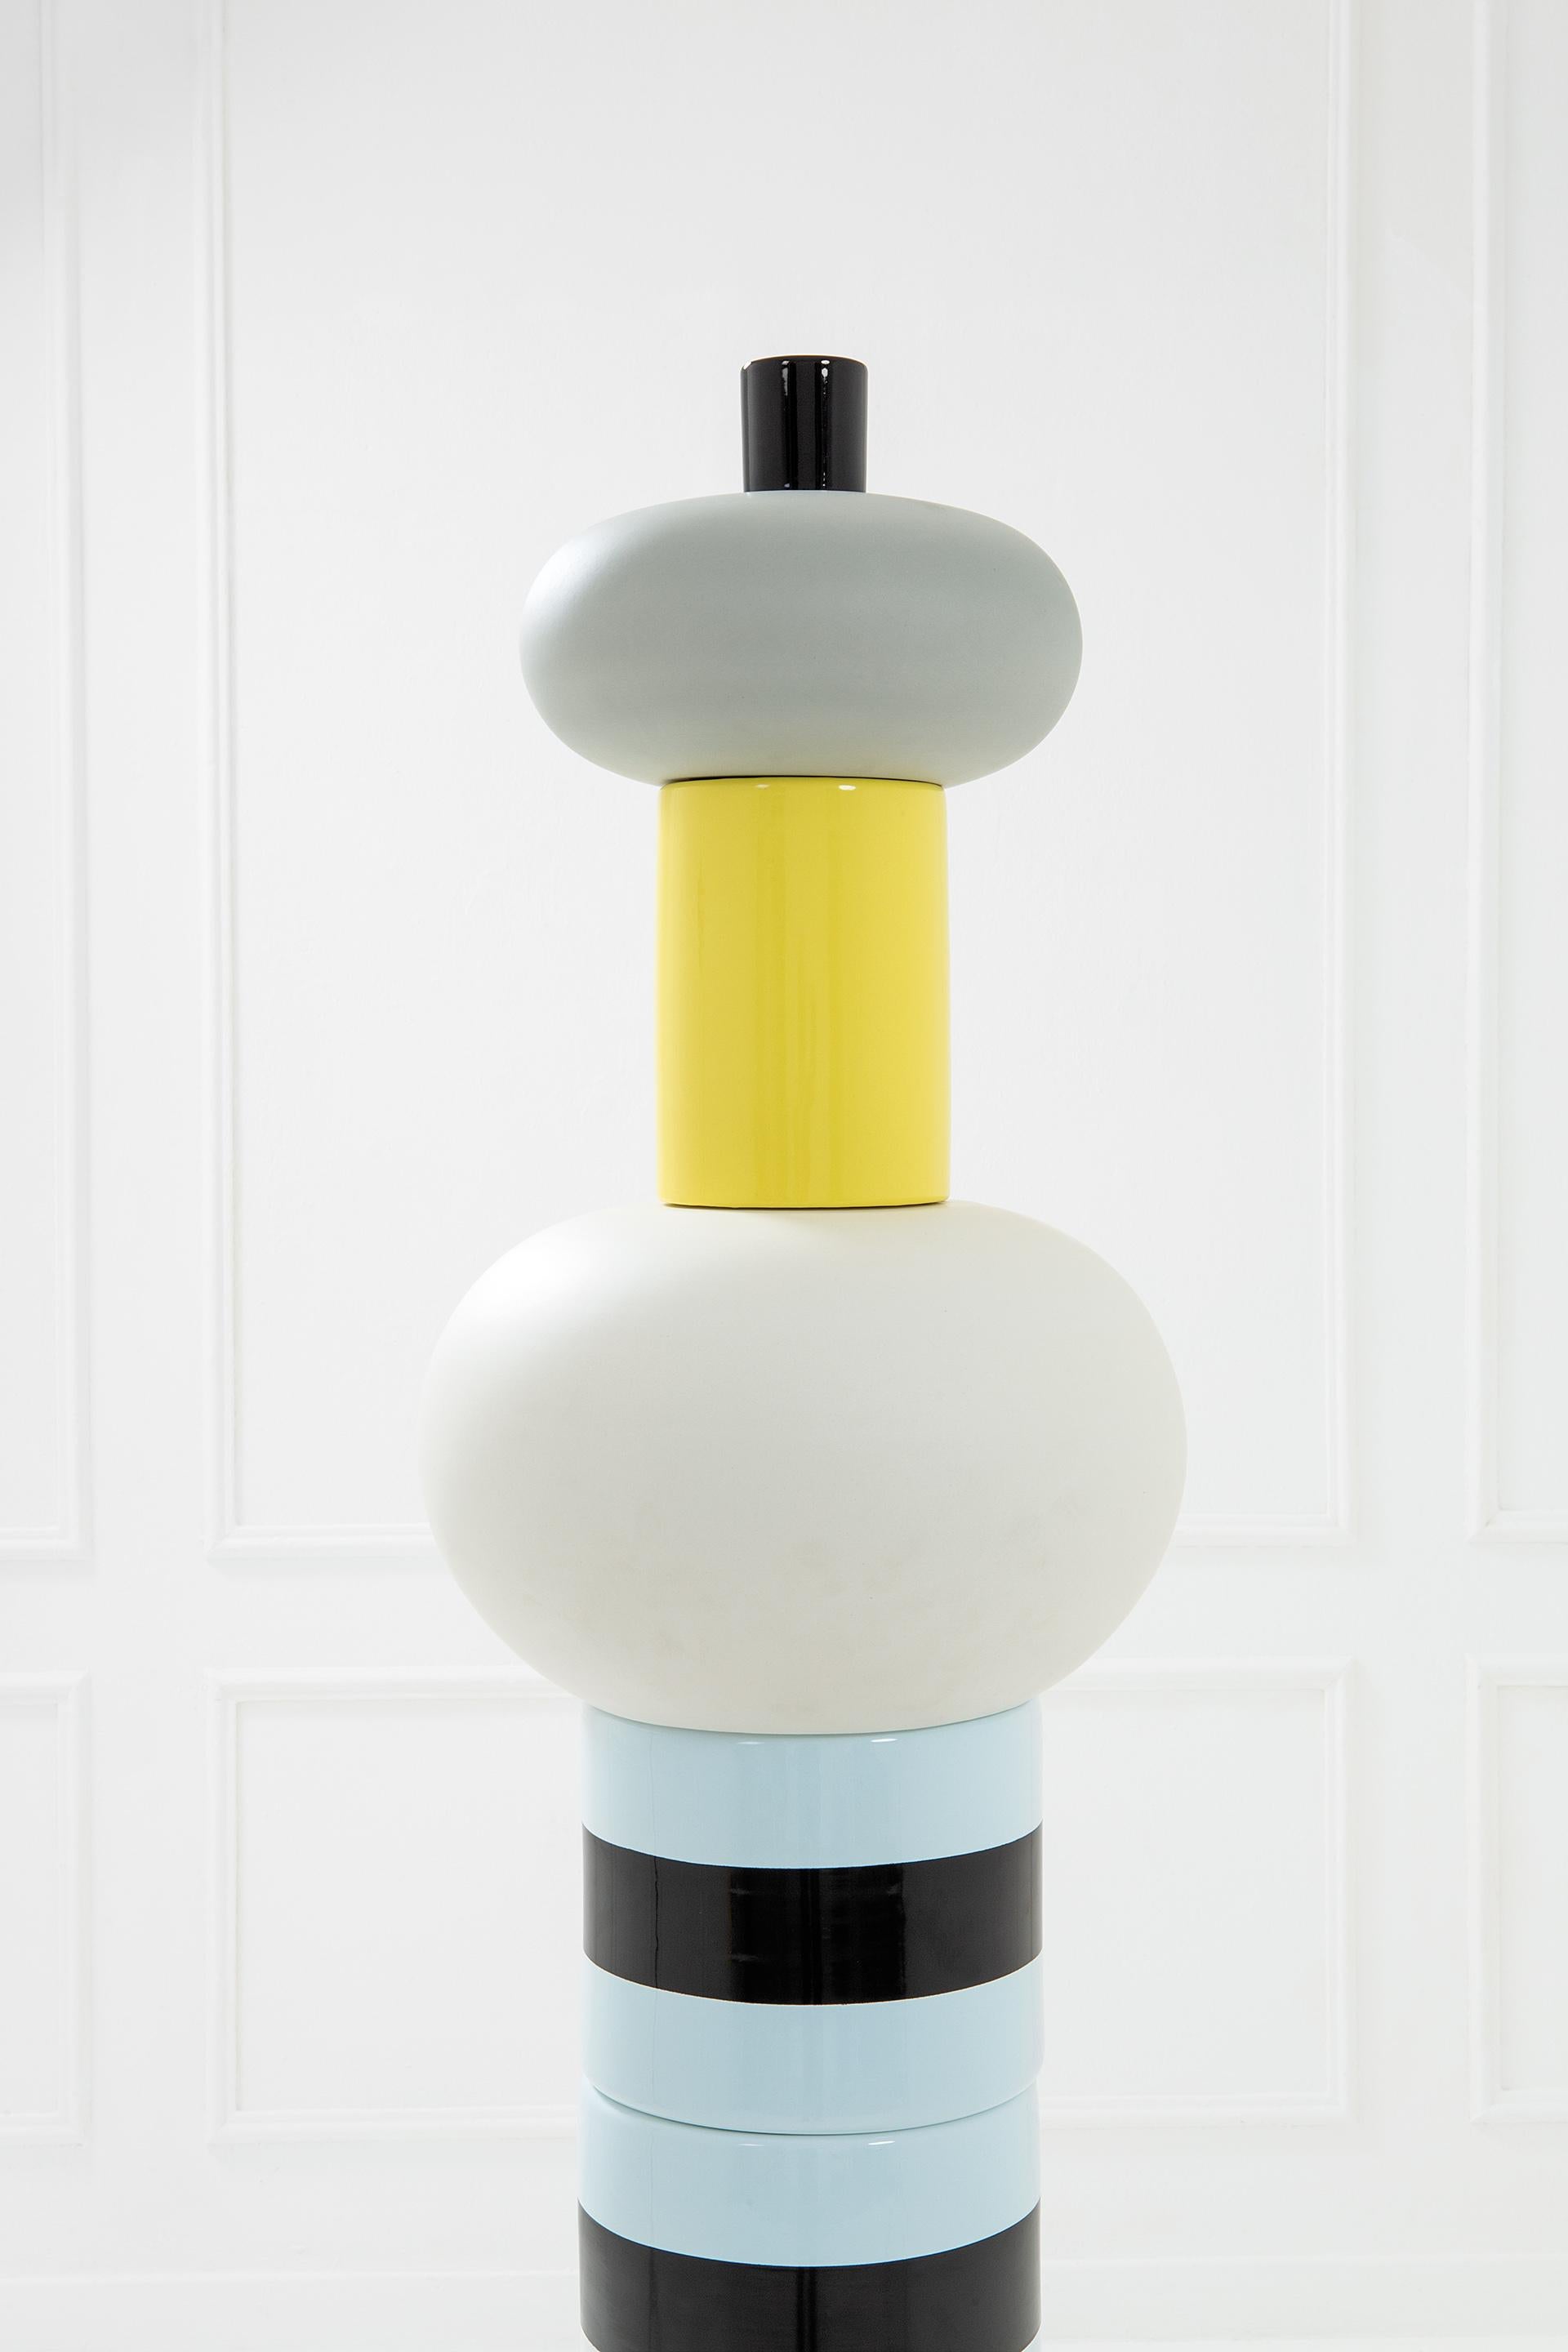 Mid-Century Modern Ettore Sottsass, Agra, Signed and Numbered, EAD Edition, 1994